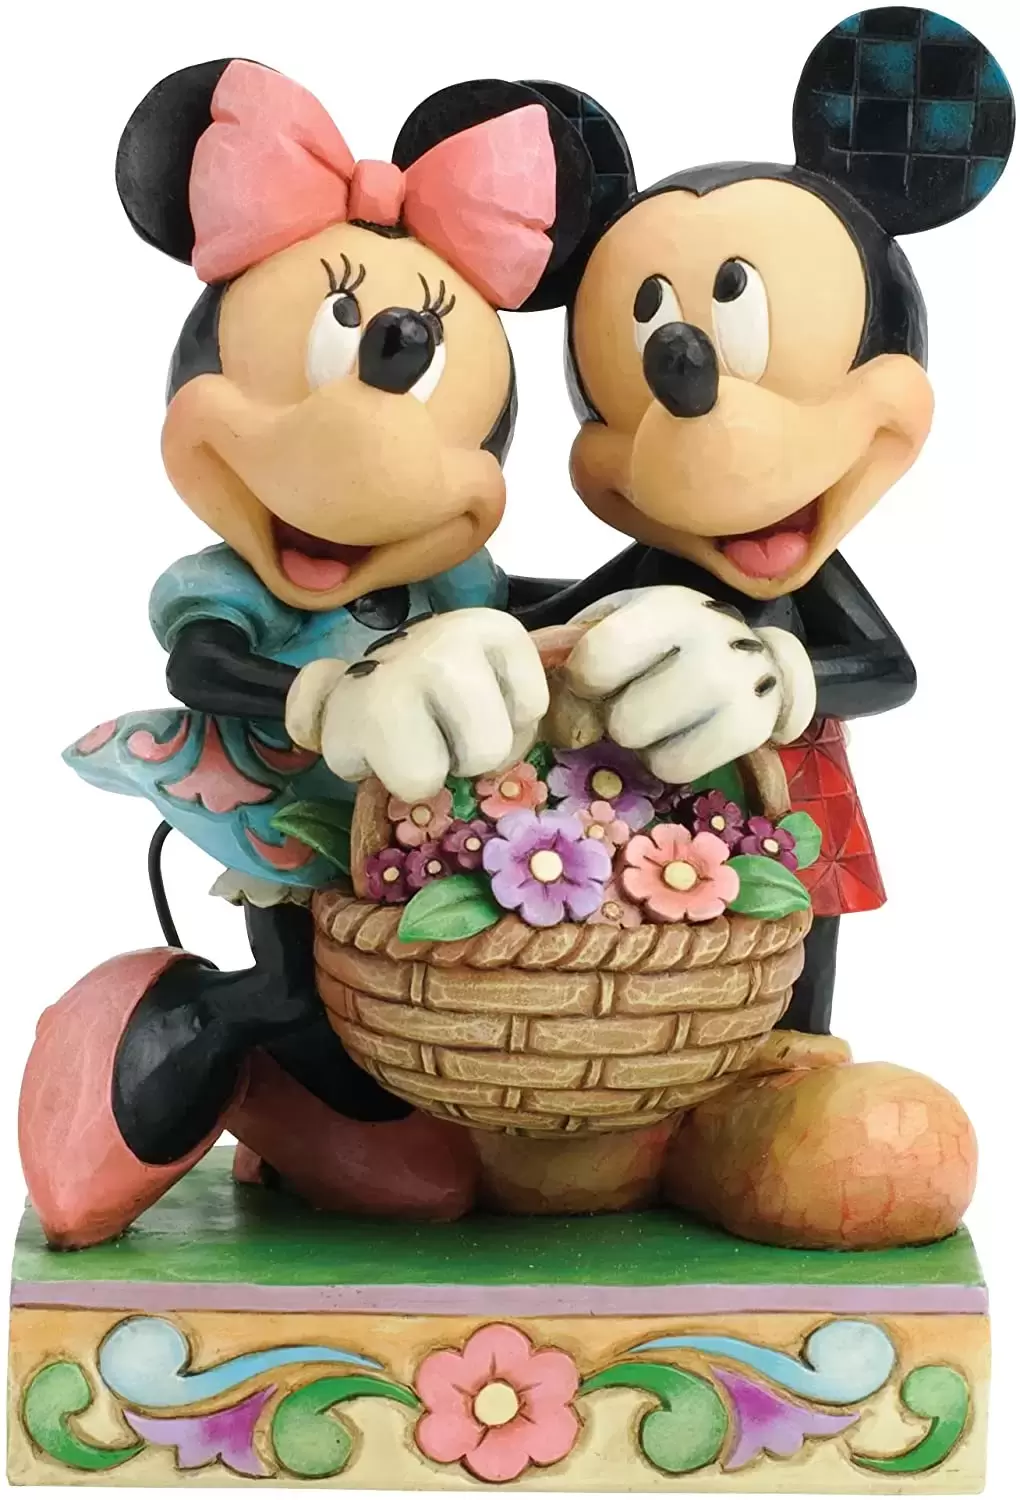 Disney Traditions by Jim Shore - Love In Bloom